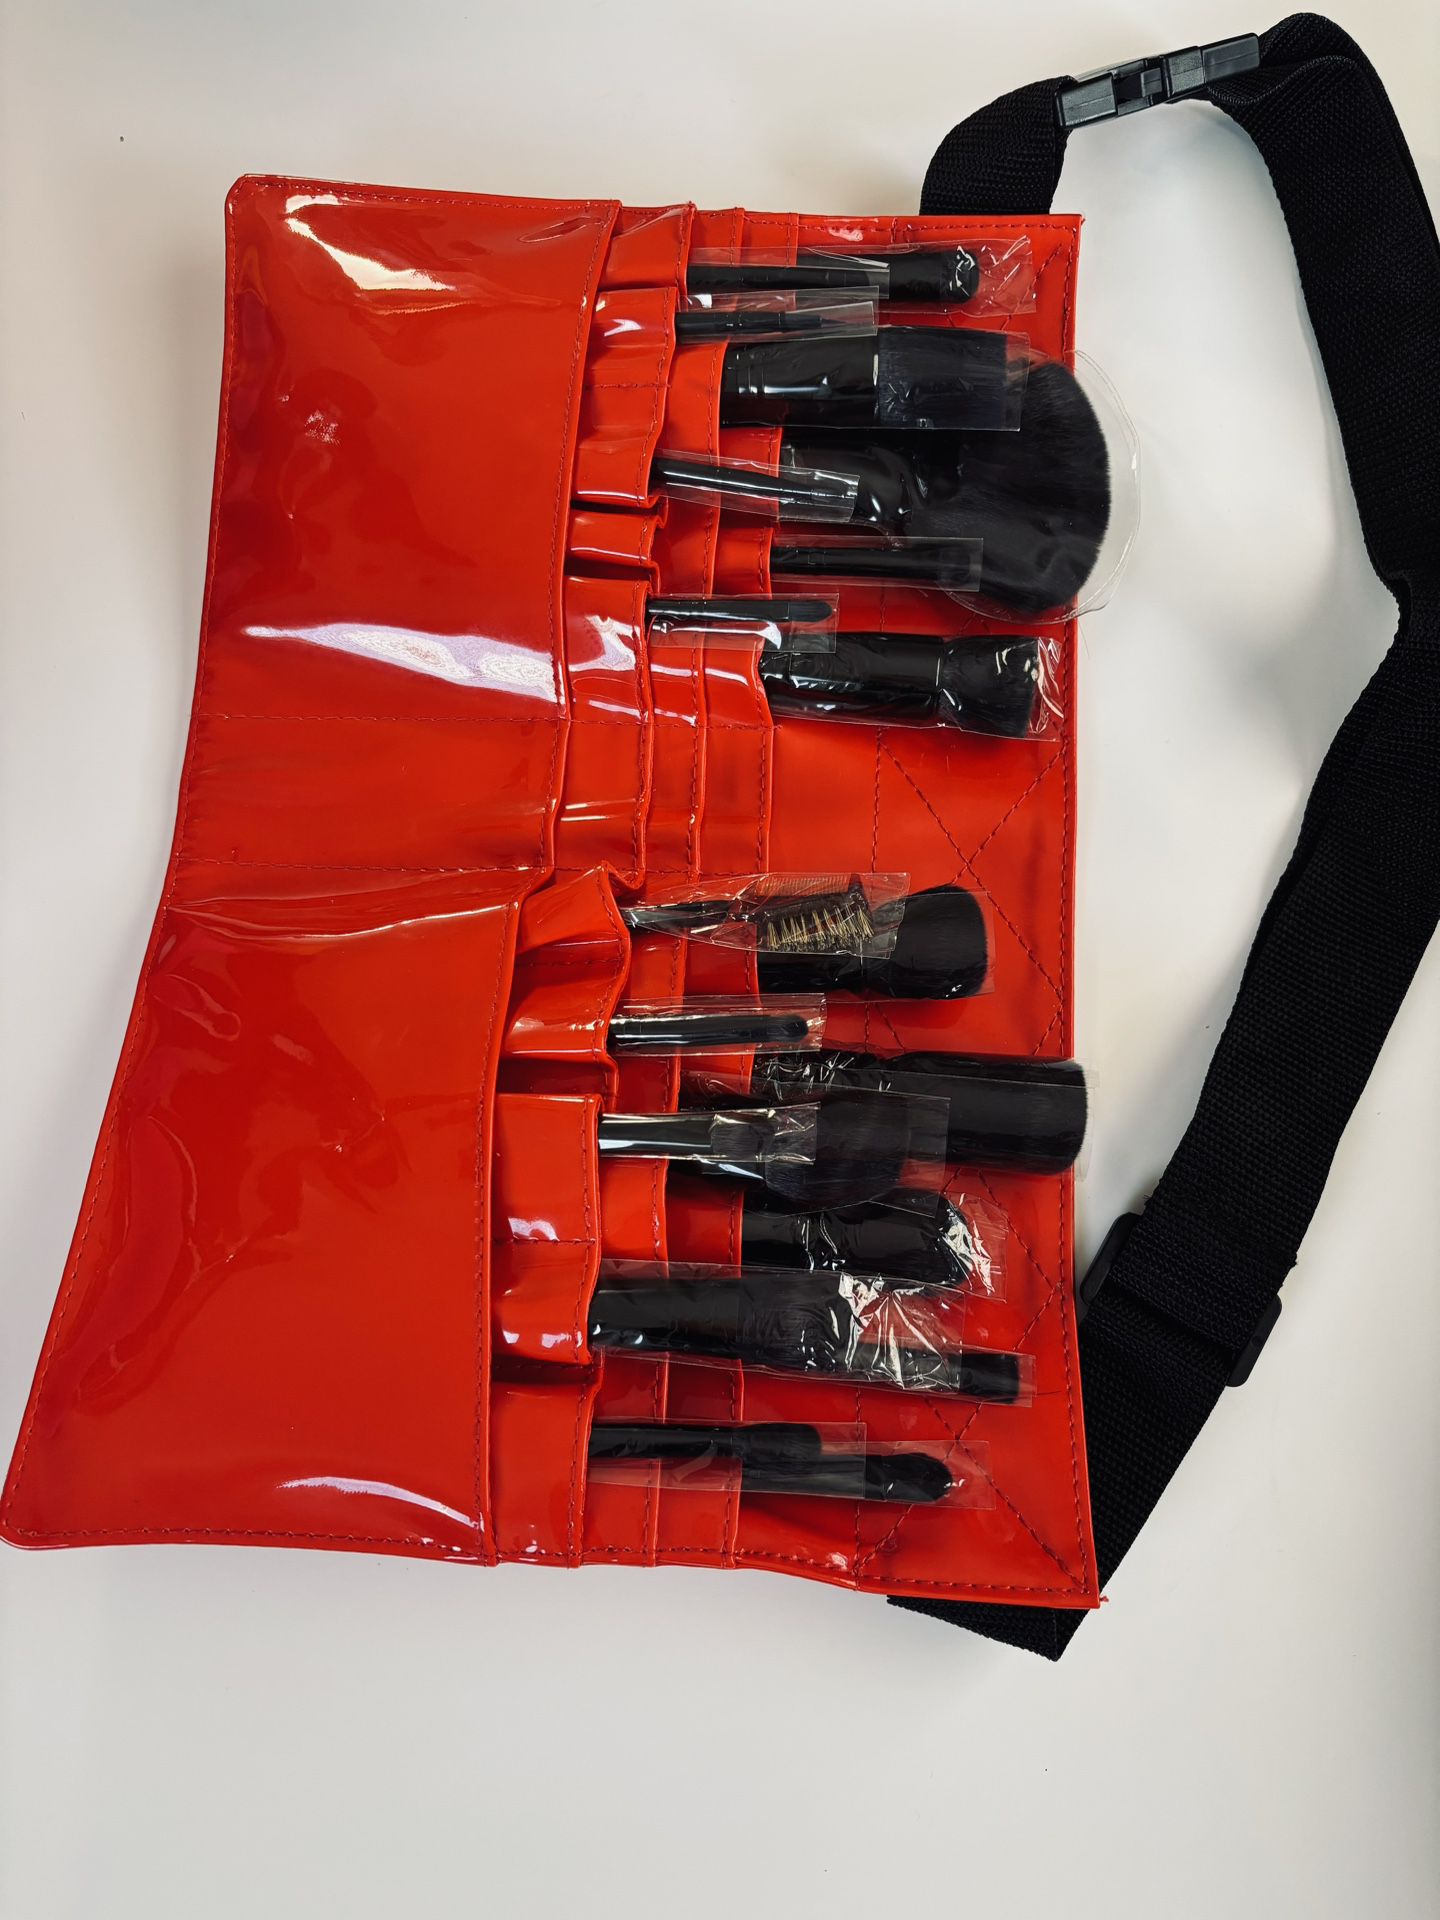 Brand New MORPHE Red Master Pro brush Set +Free Gift With Purchase !! 